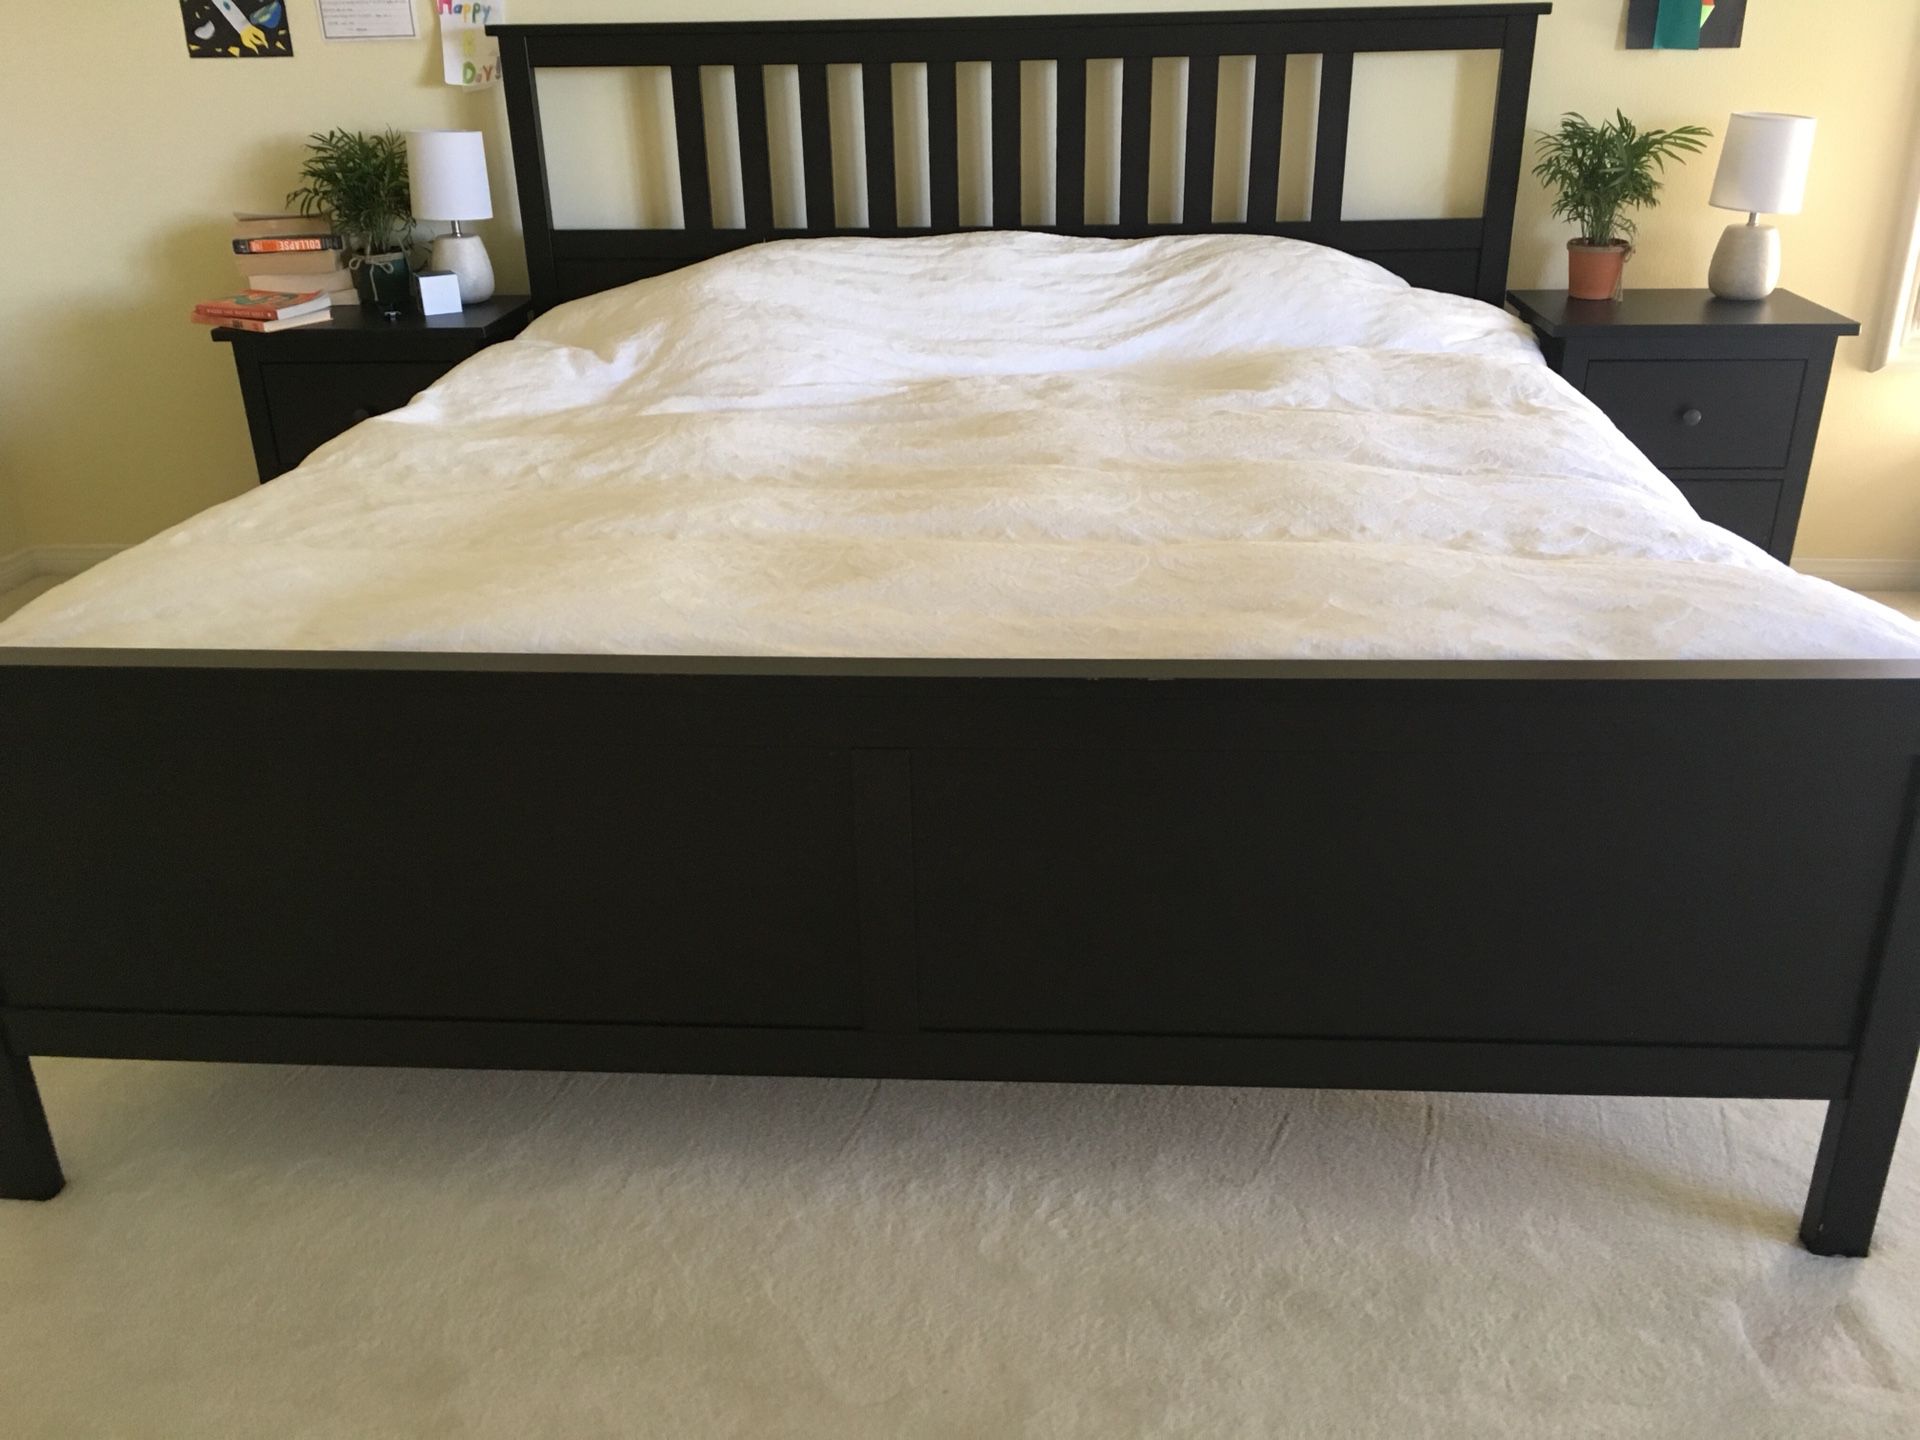 King sized bed from IKEA